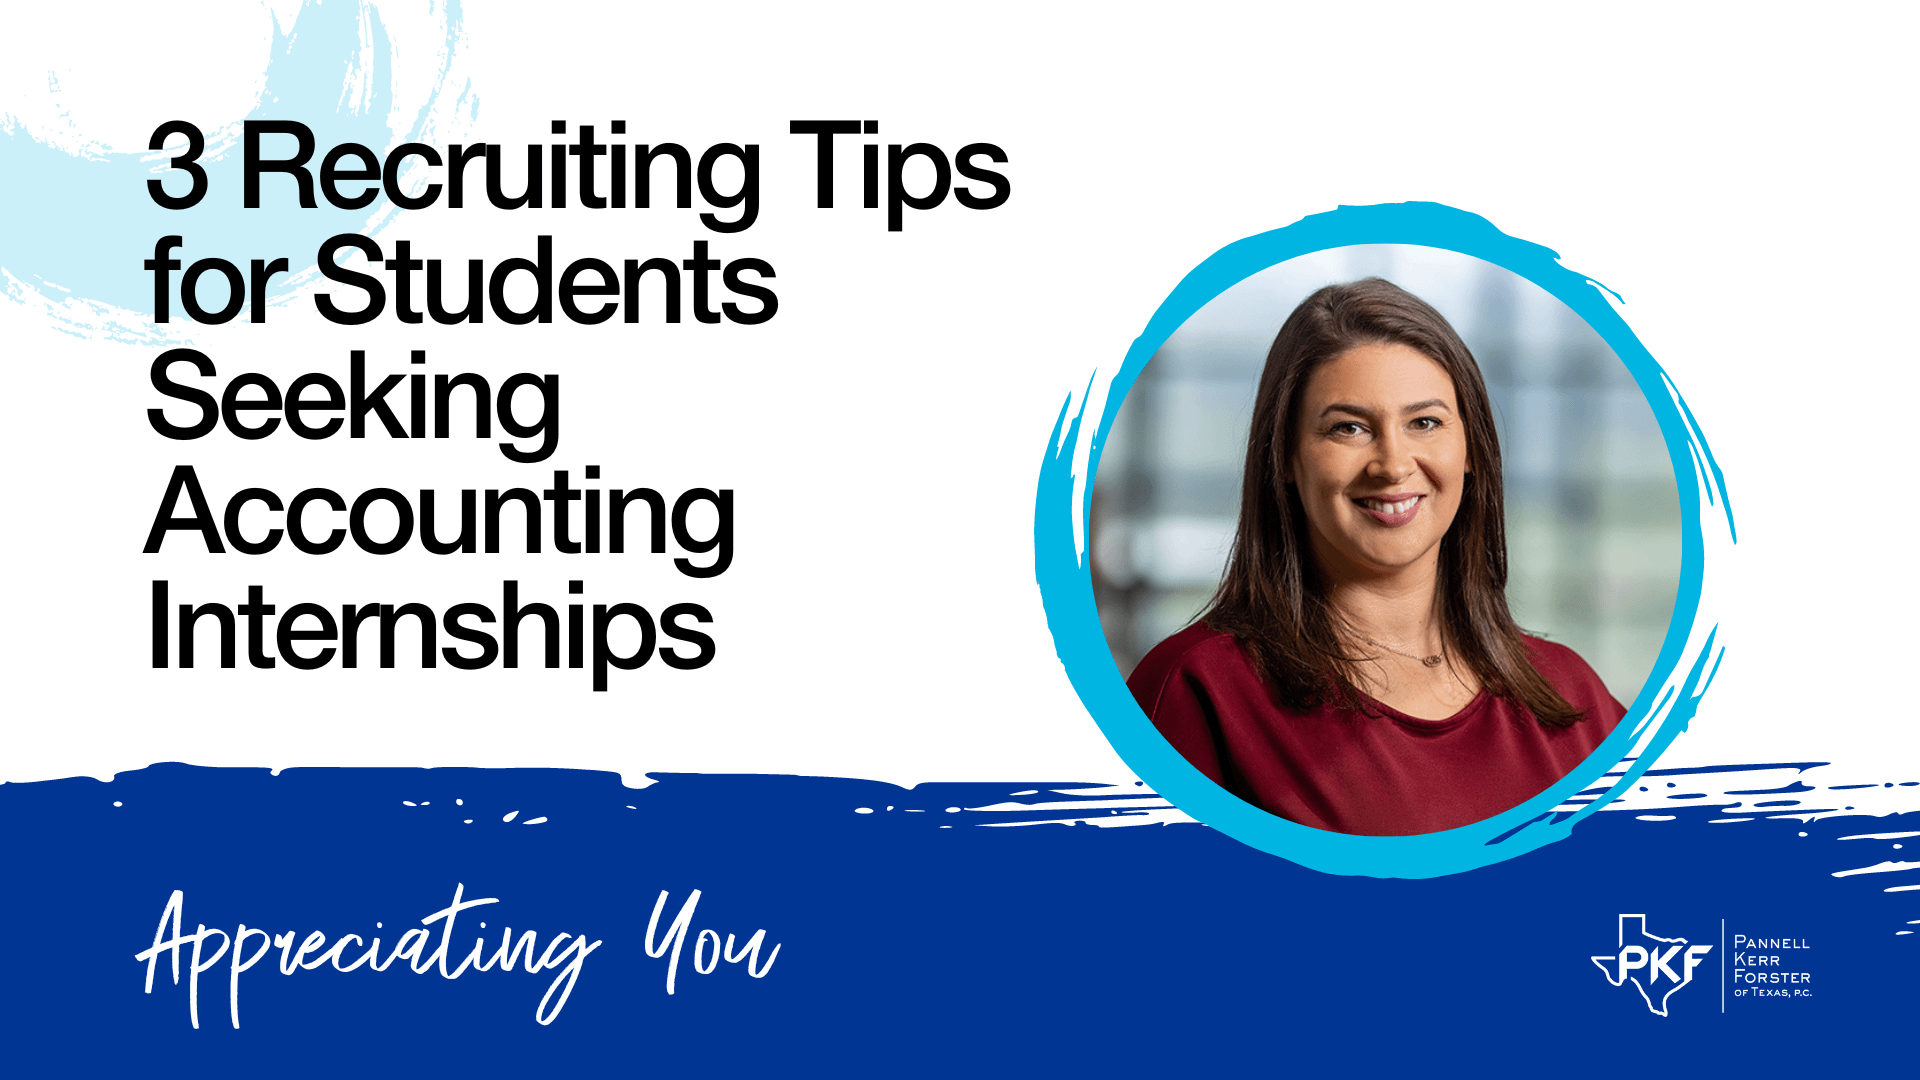 A video thumbnail image for "3 Recruiting Tips for Students Seeking Accounting Internships" featuring Emily Marsh